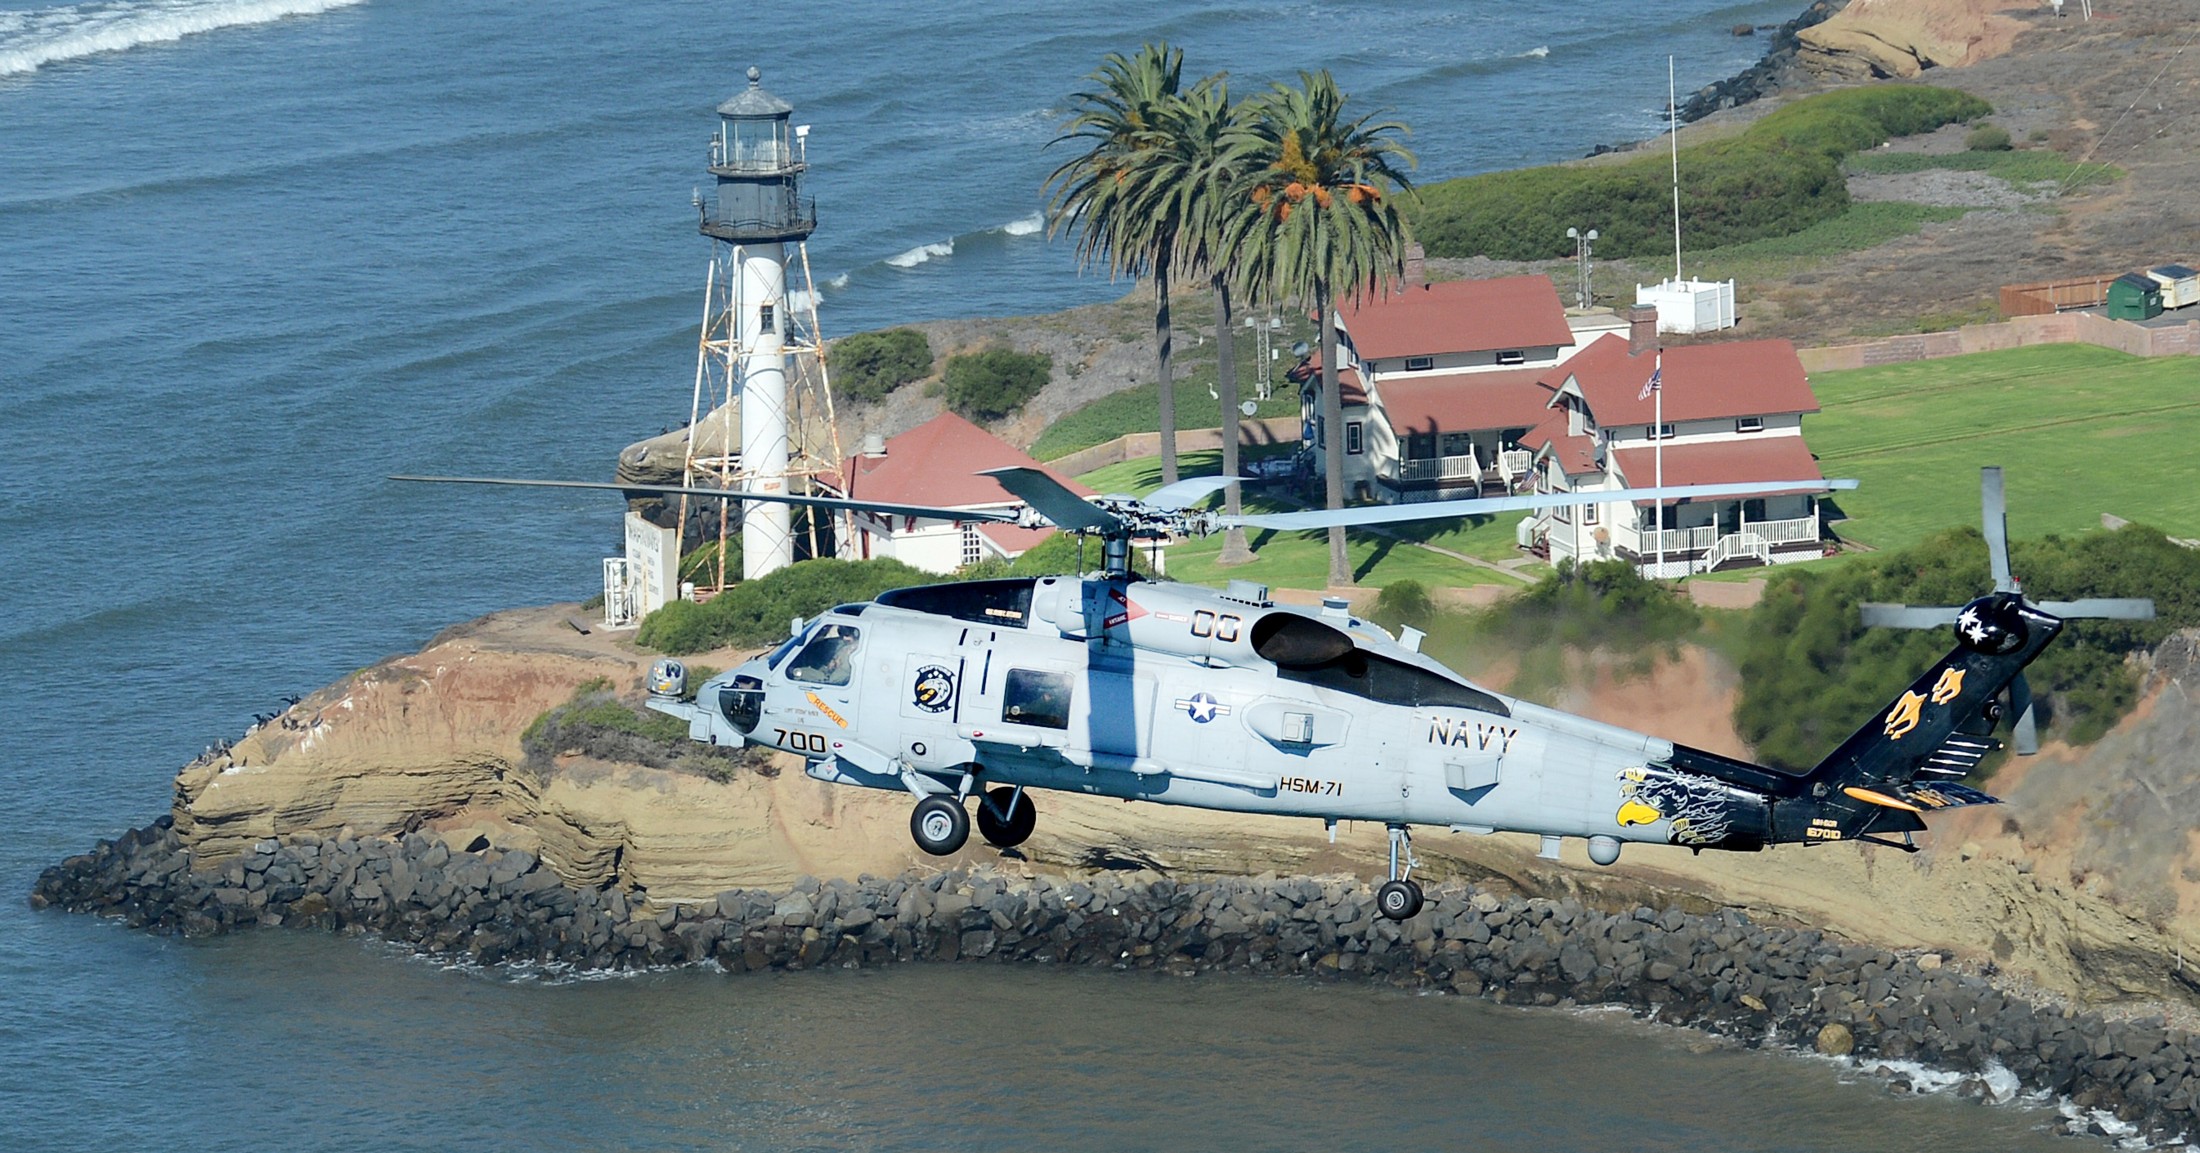 hsm-71 raptors helicopter maritime strike squadron mh-60r seahawk navy 2014 53